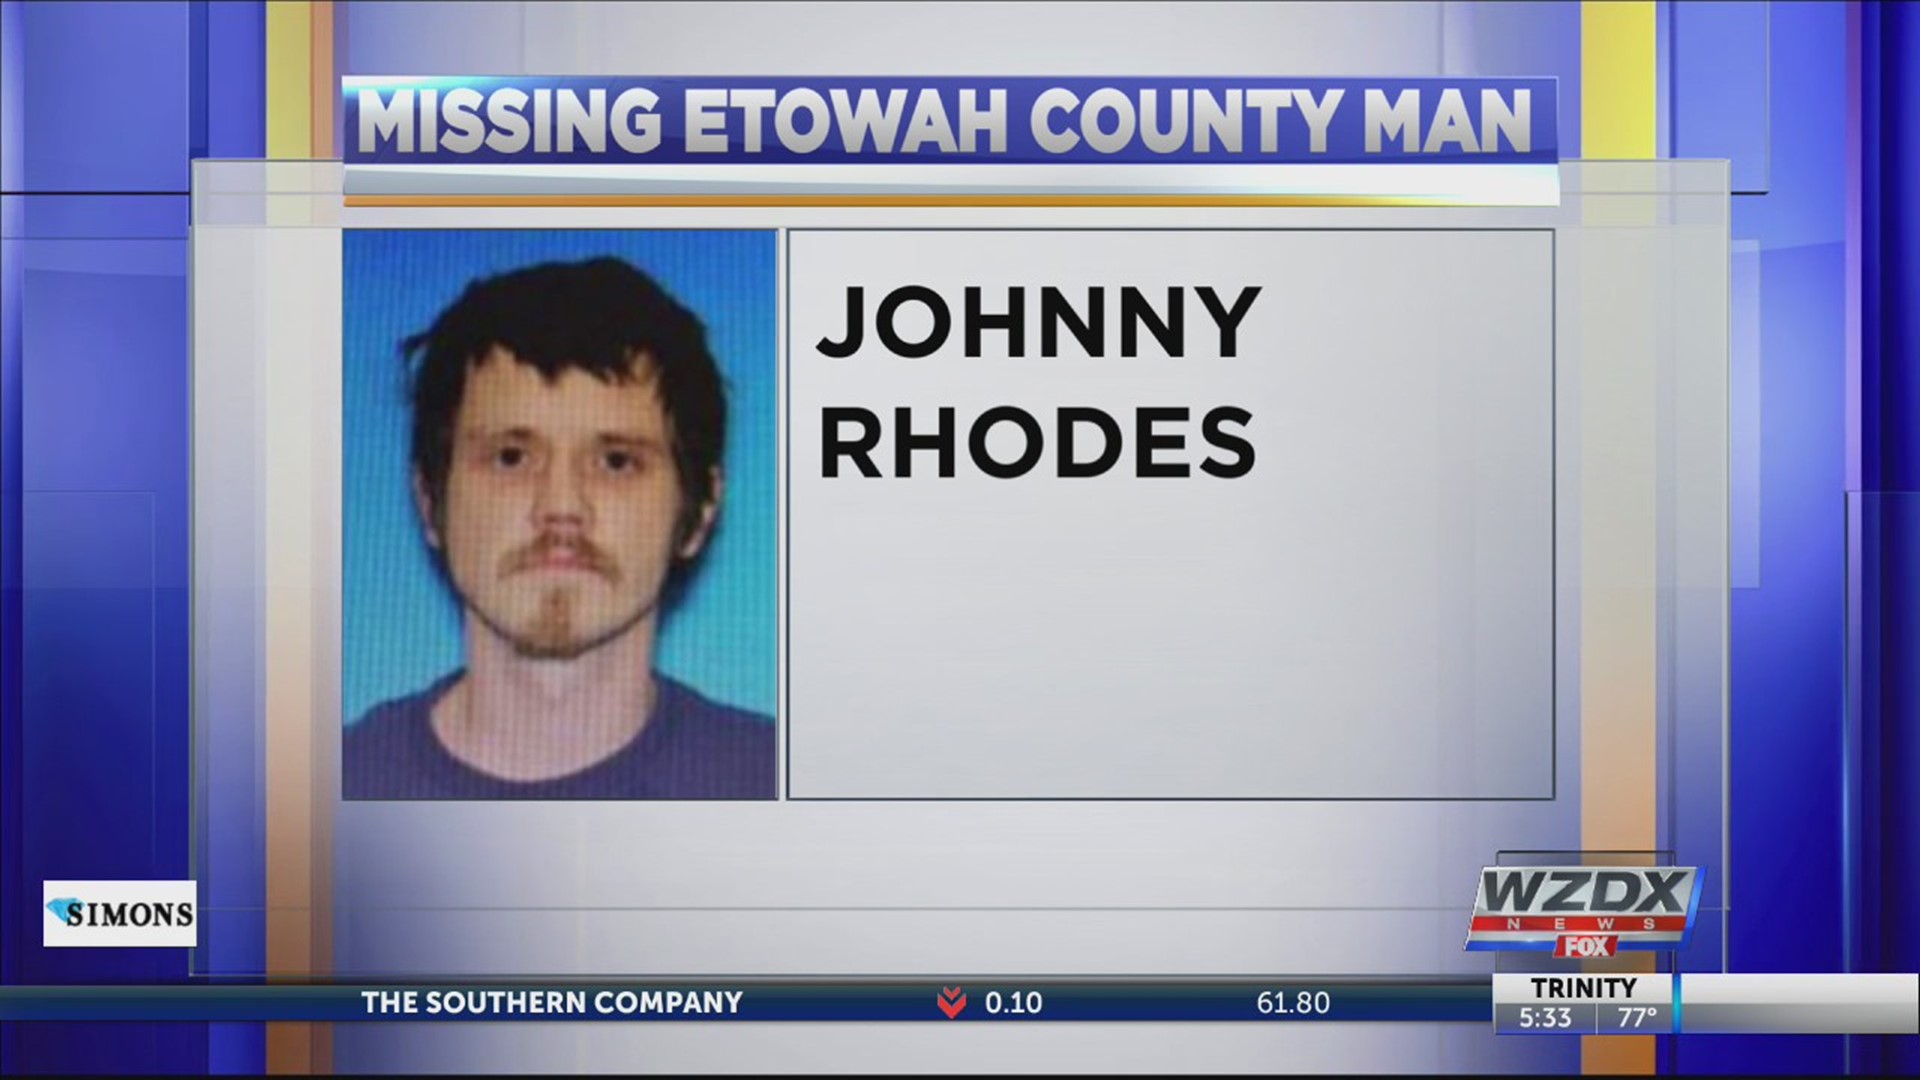 A reward is being offered in the hope that is will help bring missing Johnny Rhodes home.